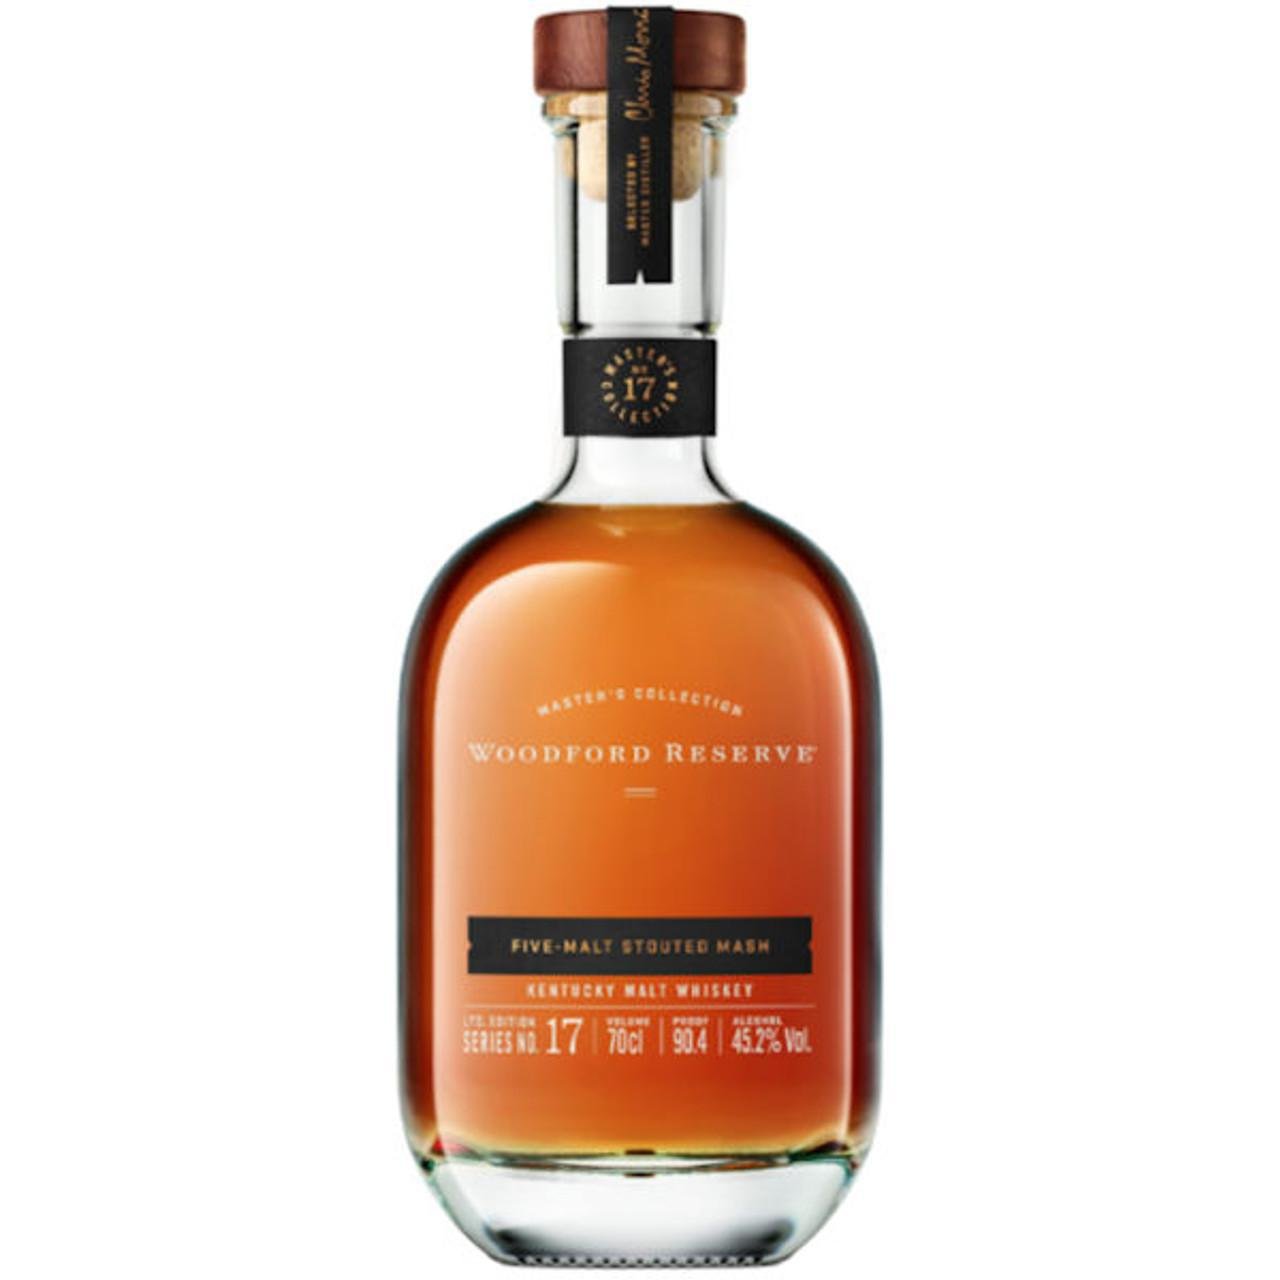 Woodford Reserve Distillery - 'Limited Edition No. 17: Five-Malt Stouted Mash' Kentucky Malt Whiskey (750ML) - The Epicurean Trader